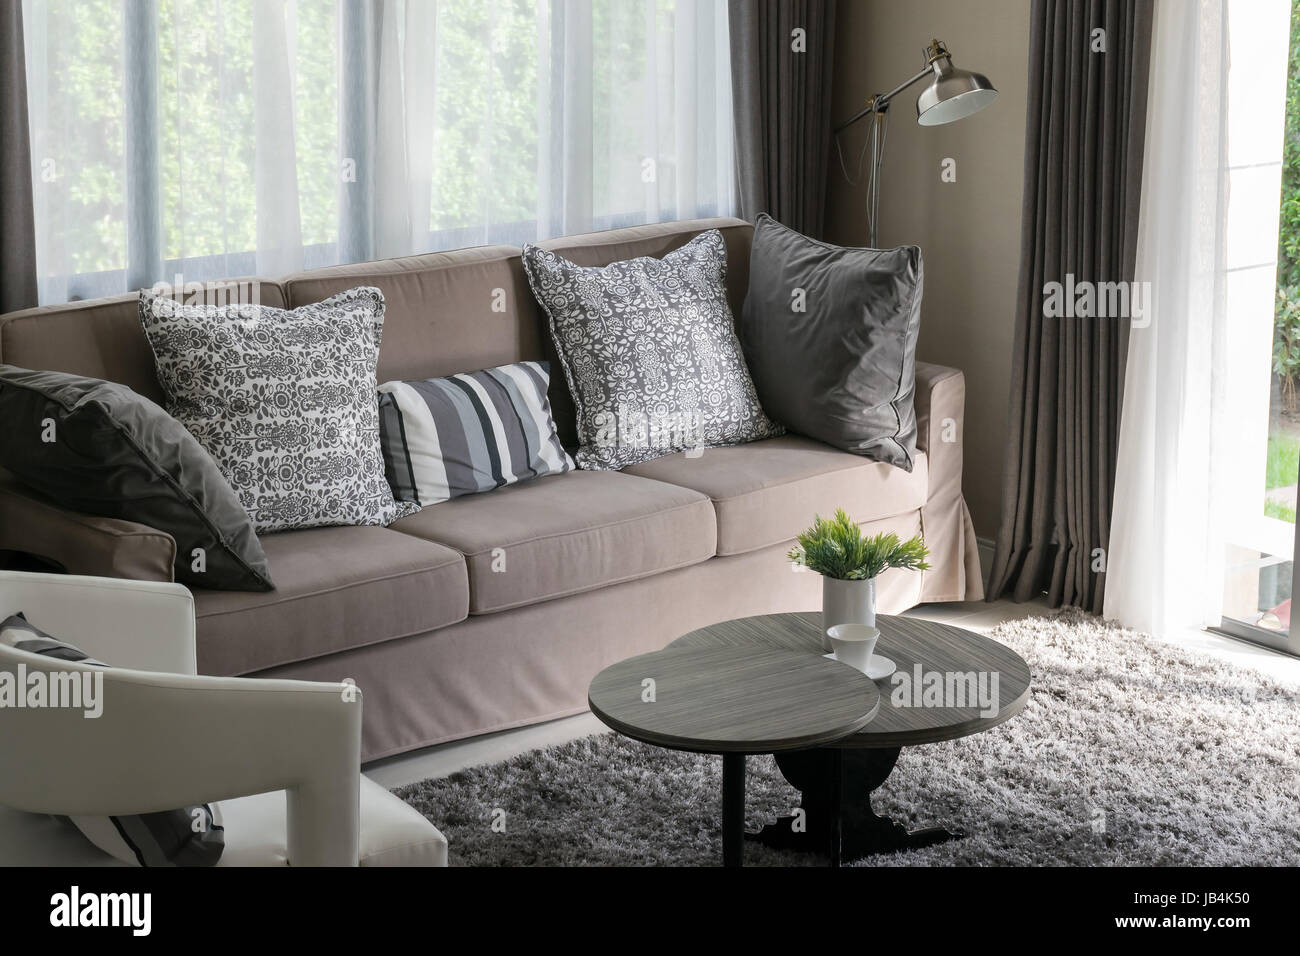 Sturdy brown tweed sofa with grey patterned pillows Stock Photo